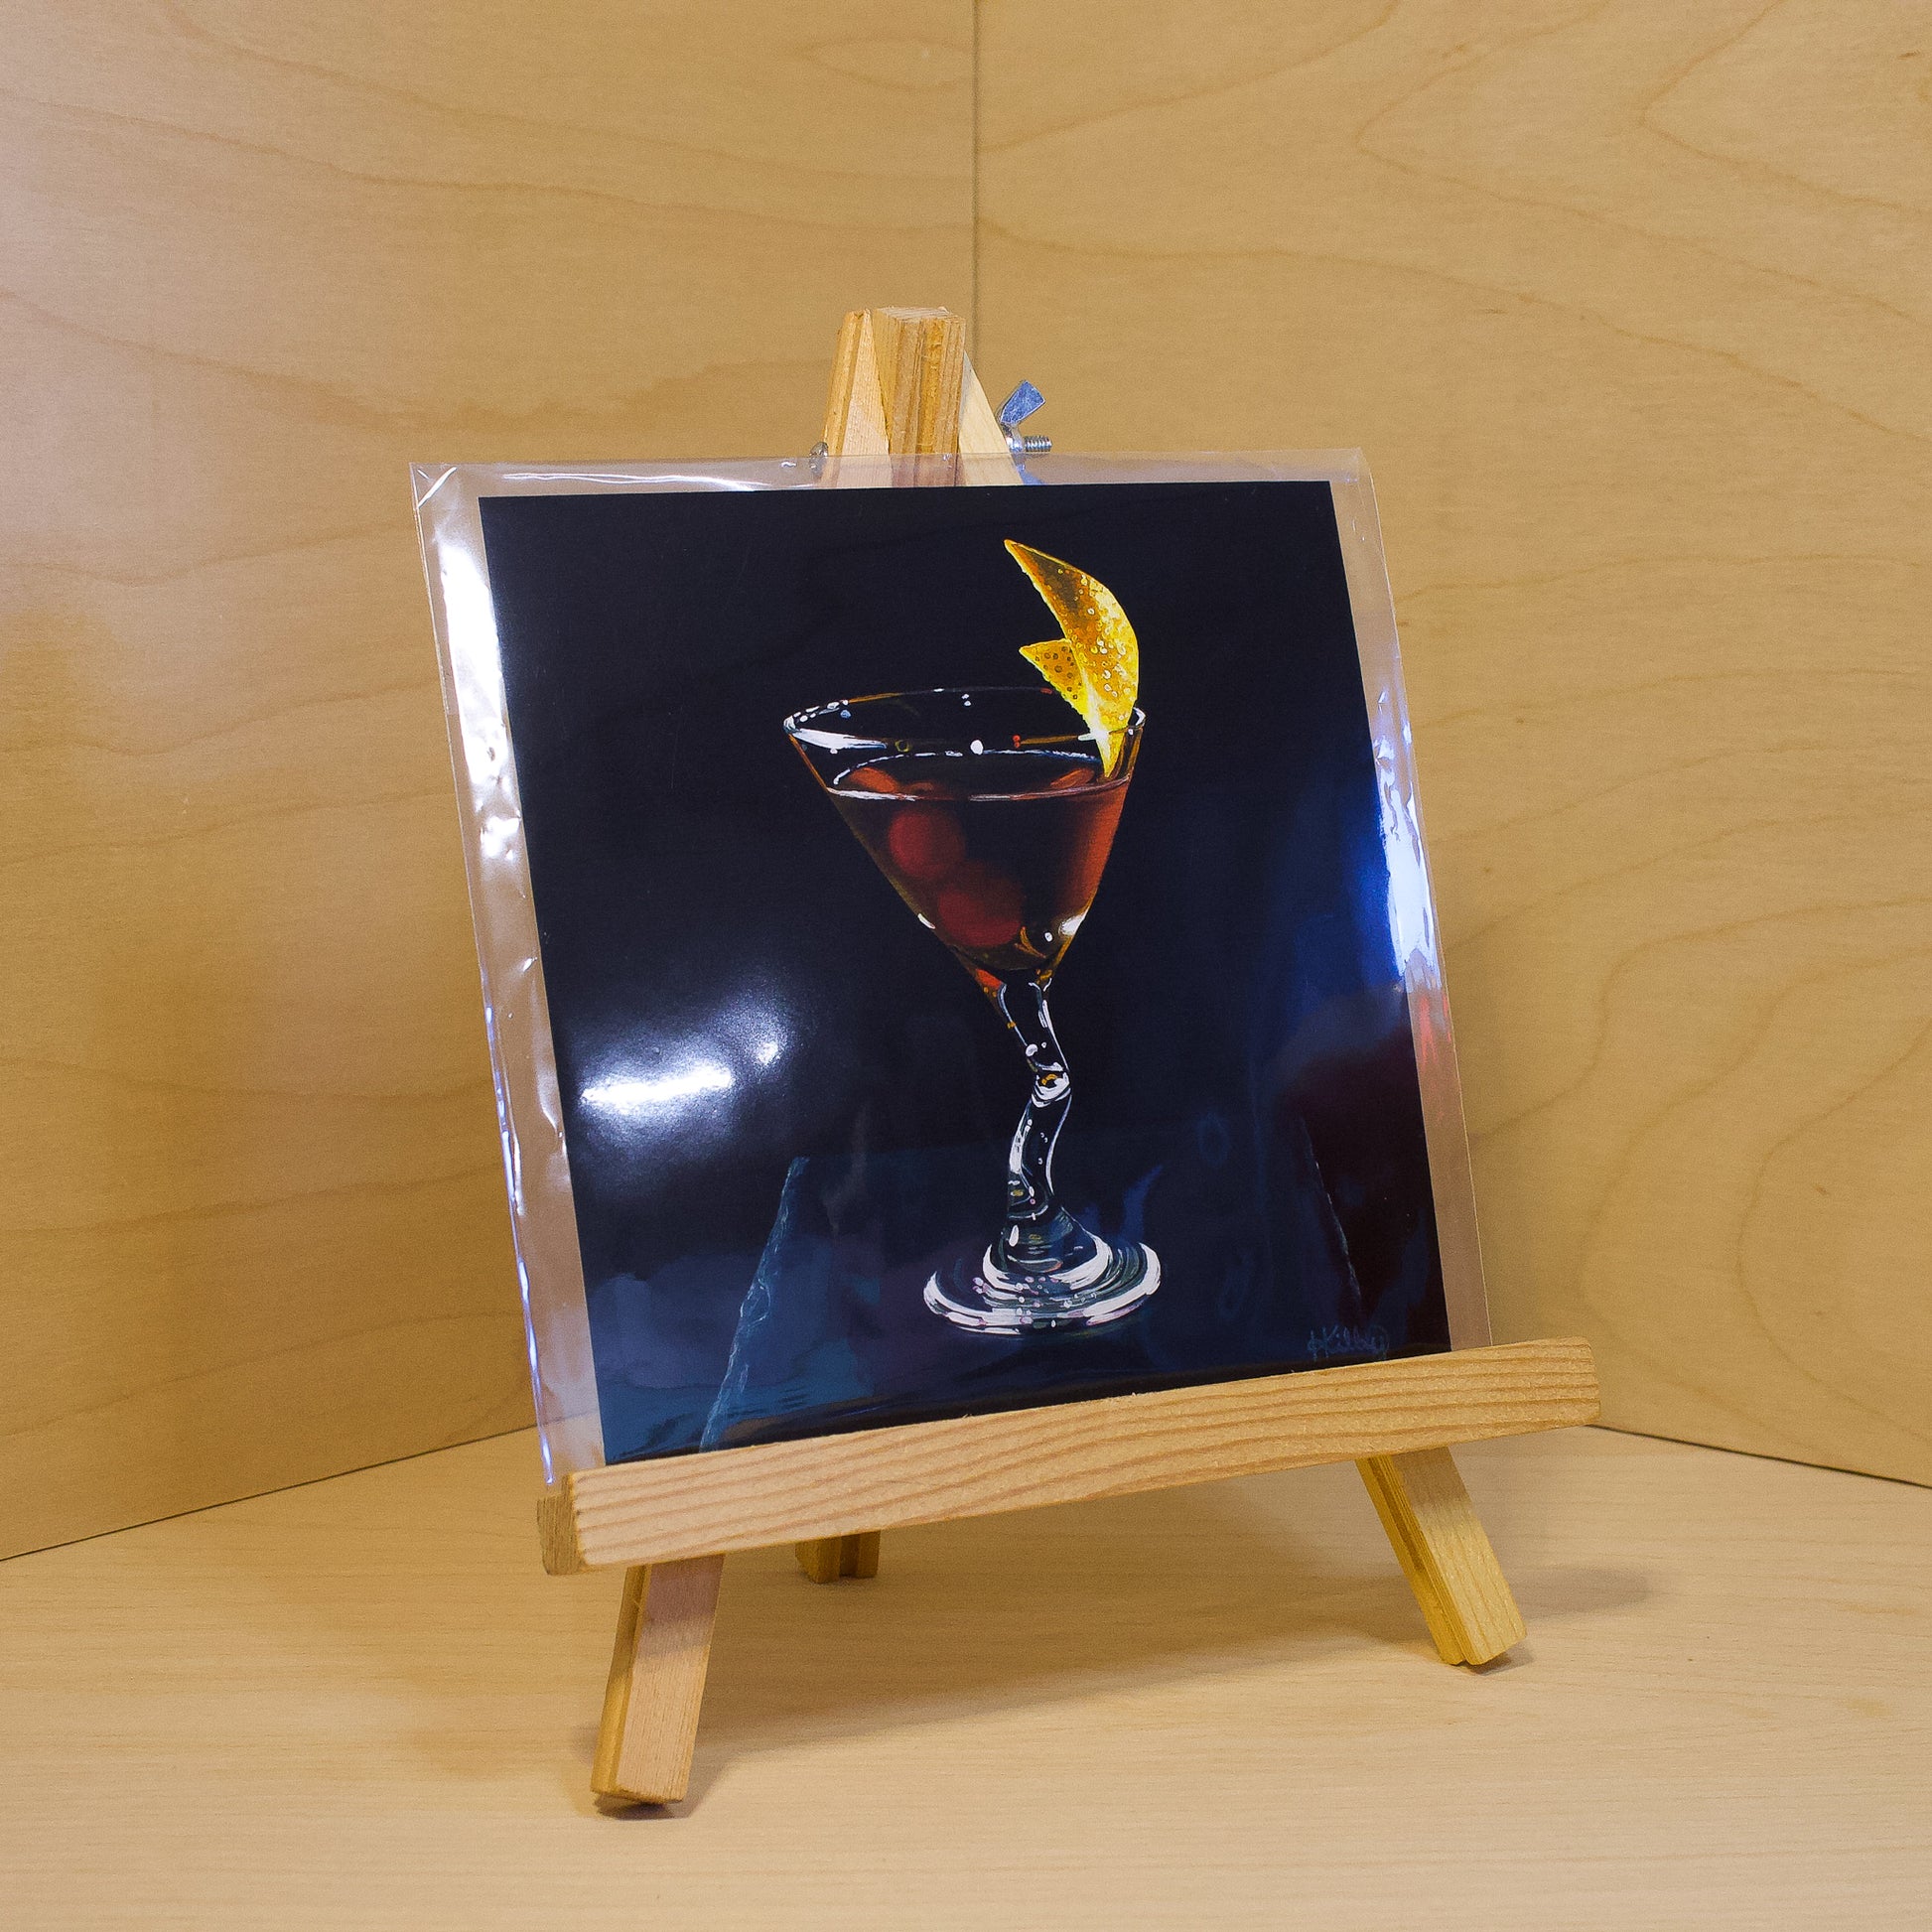 A 6x6" fine art print of the original acrylic painting "Manhattan" by Hannah Kilby from Hannah Michelle Studios. Displayed in a protective plastic sleeve on a small, wooden easel.